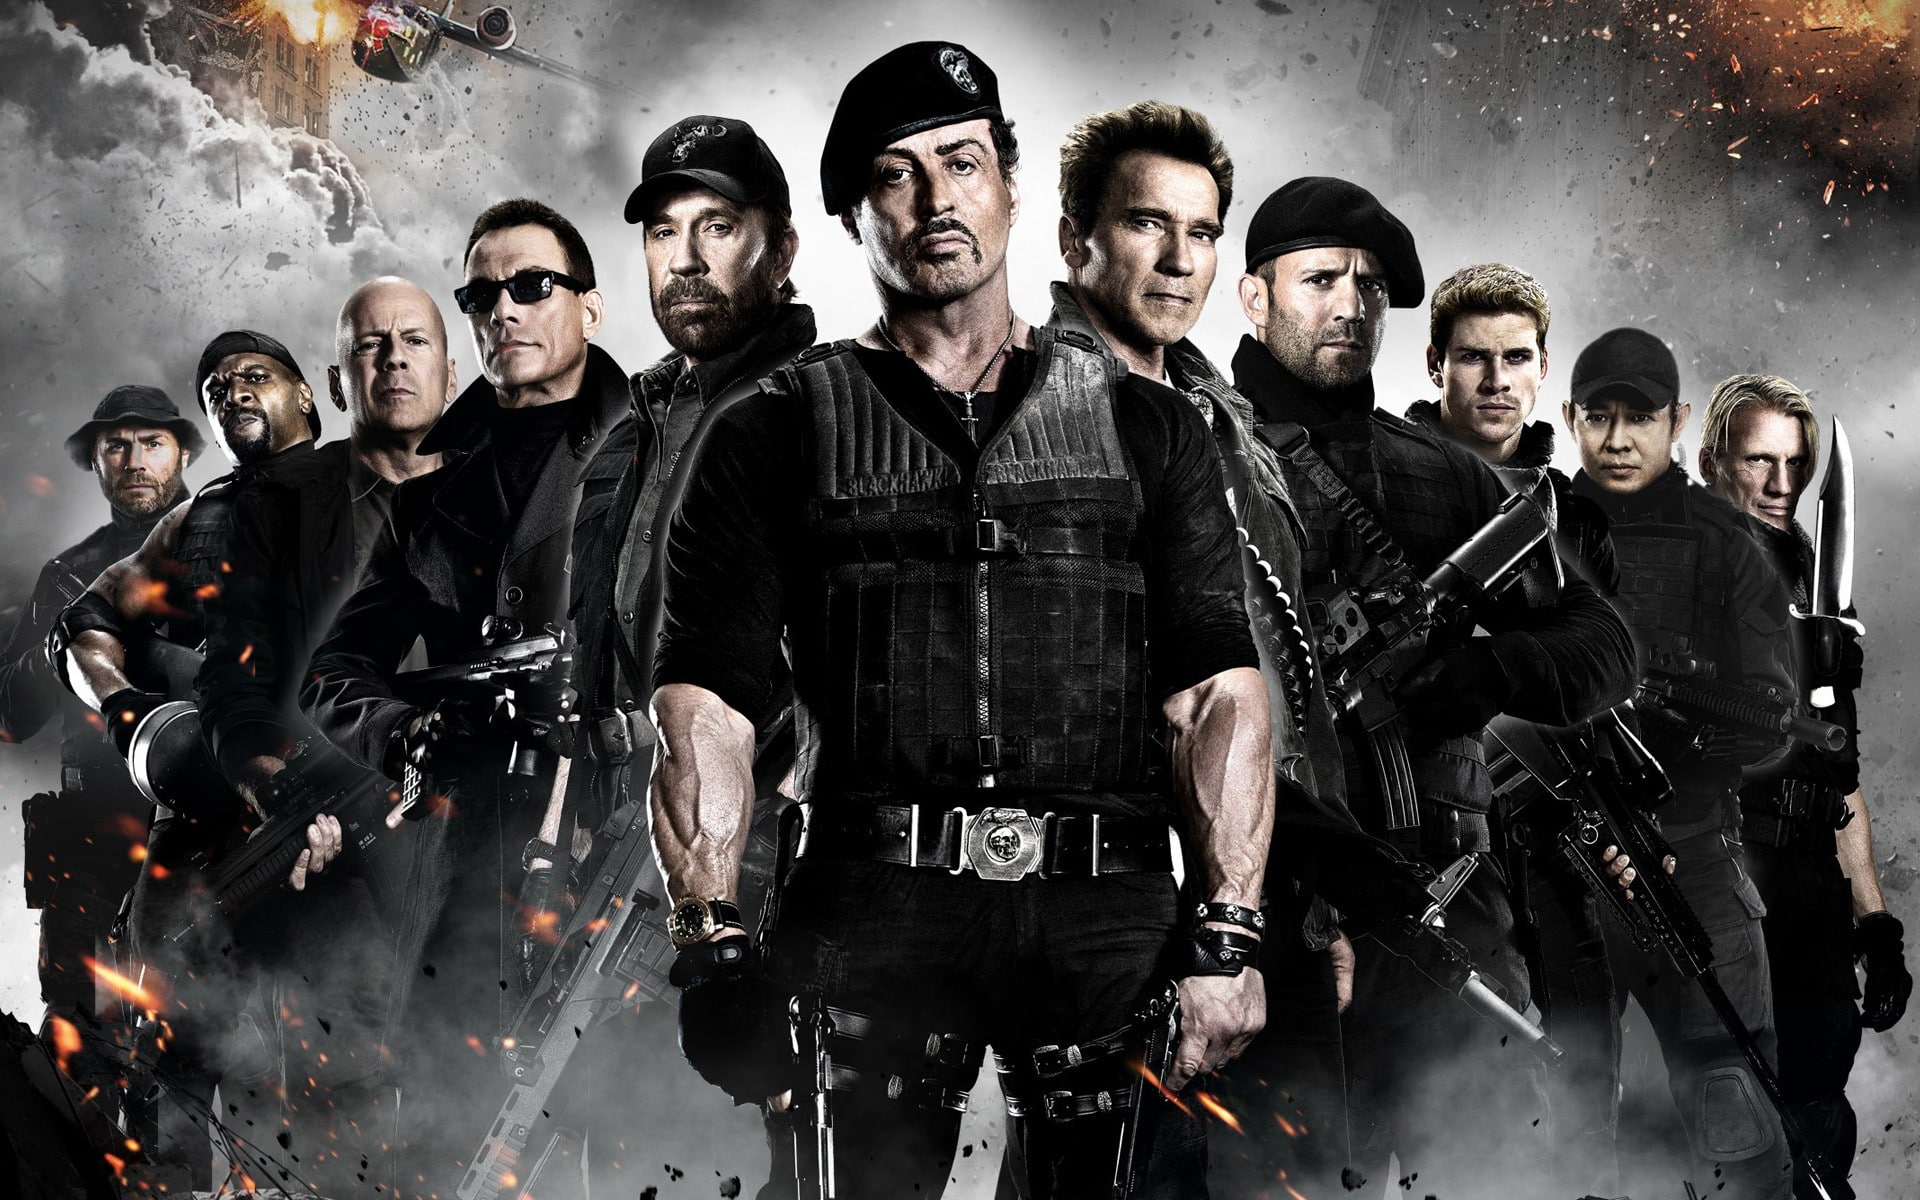 arnold, bruce, chuck, expendables, jason, jet, movies, norris